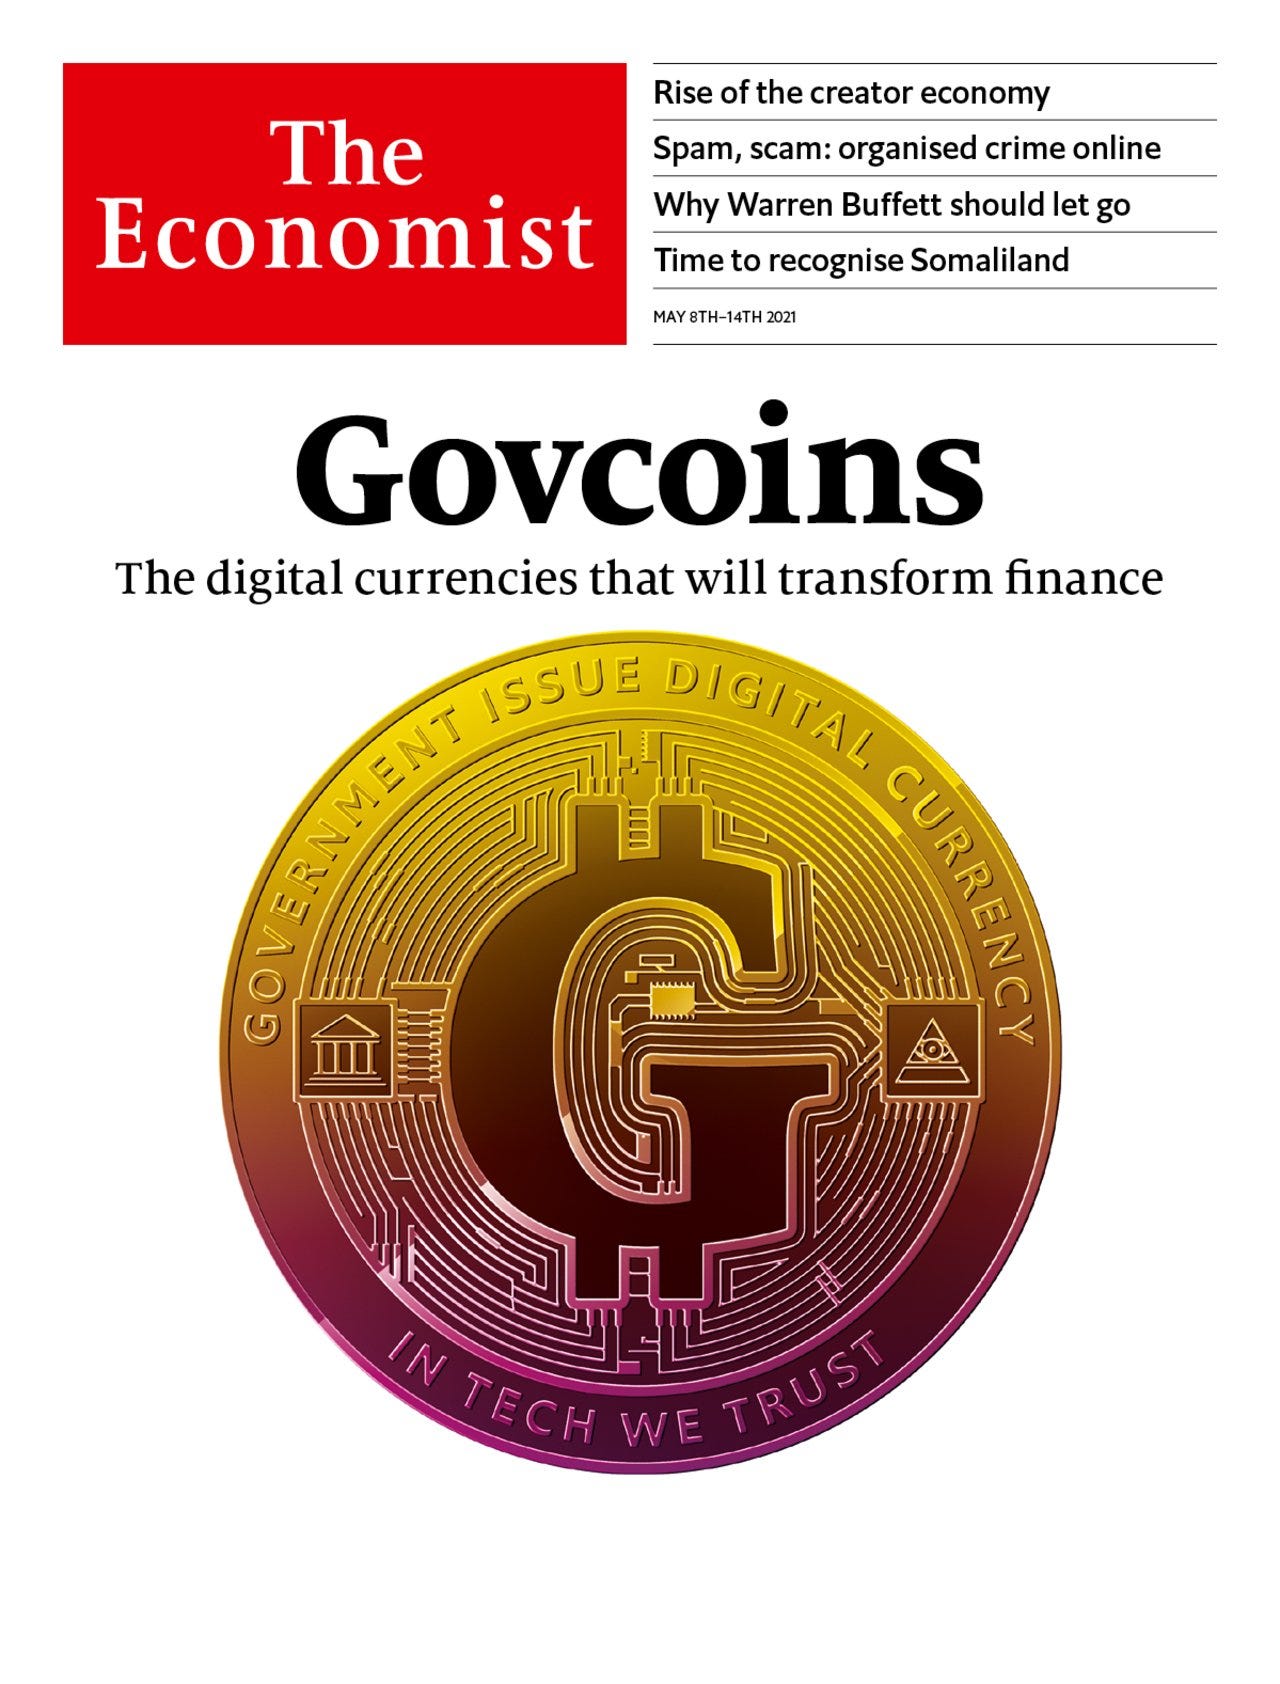 The digital currencies that matter